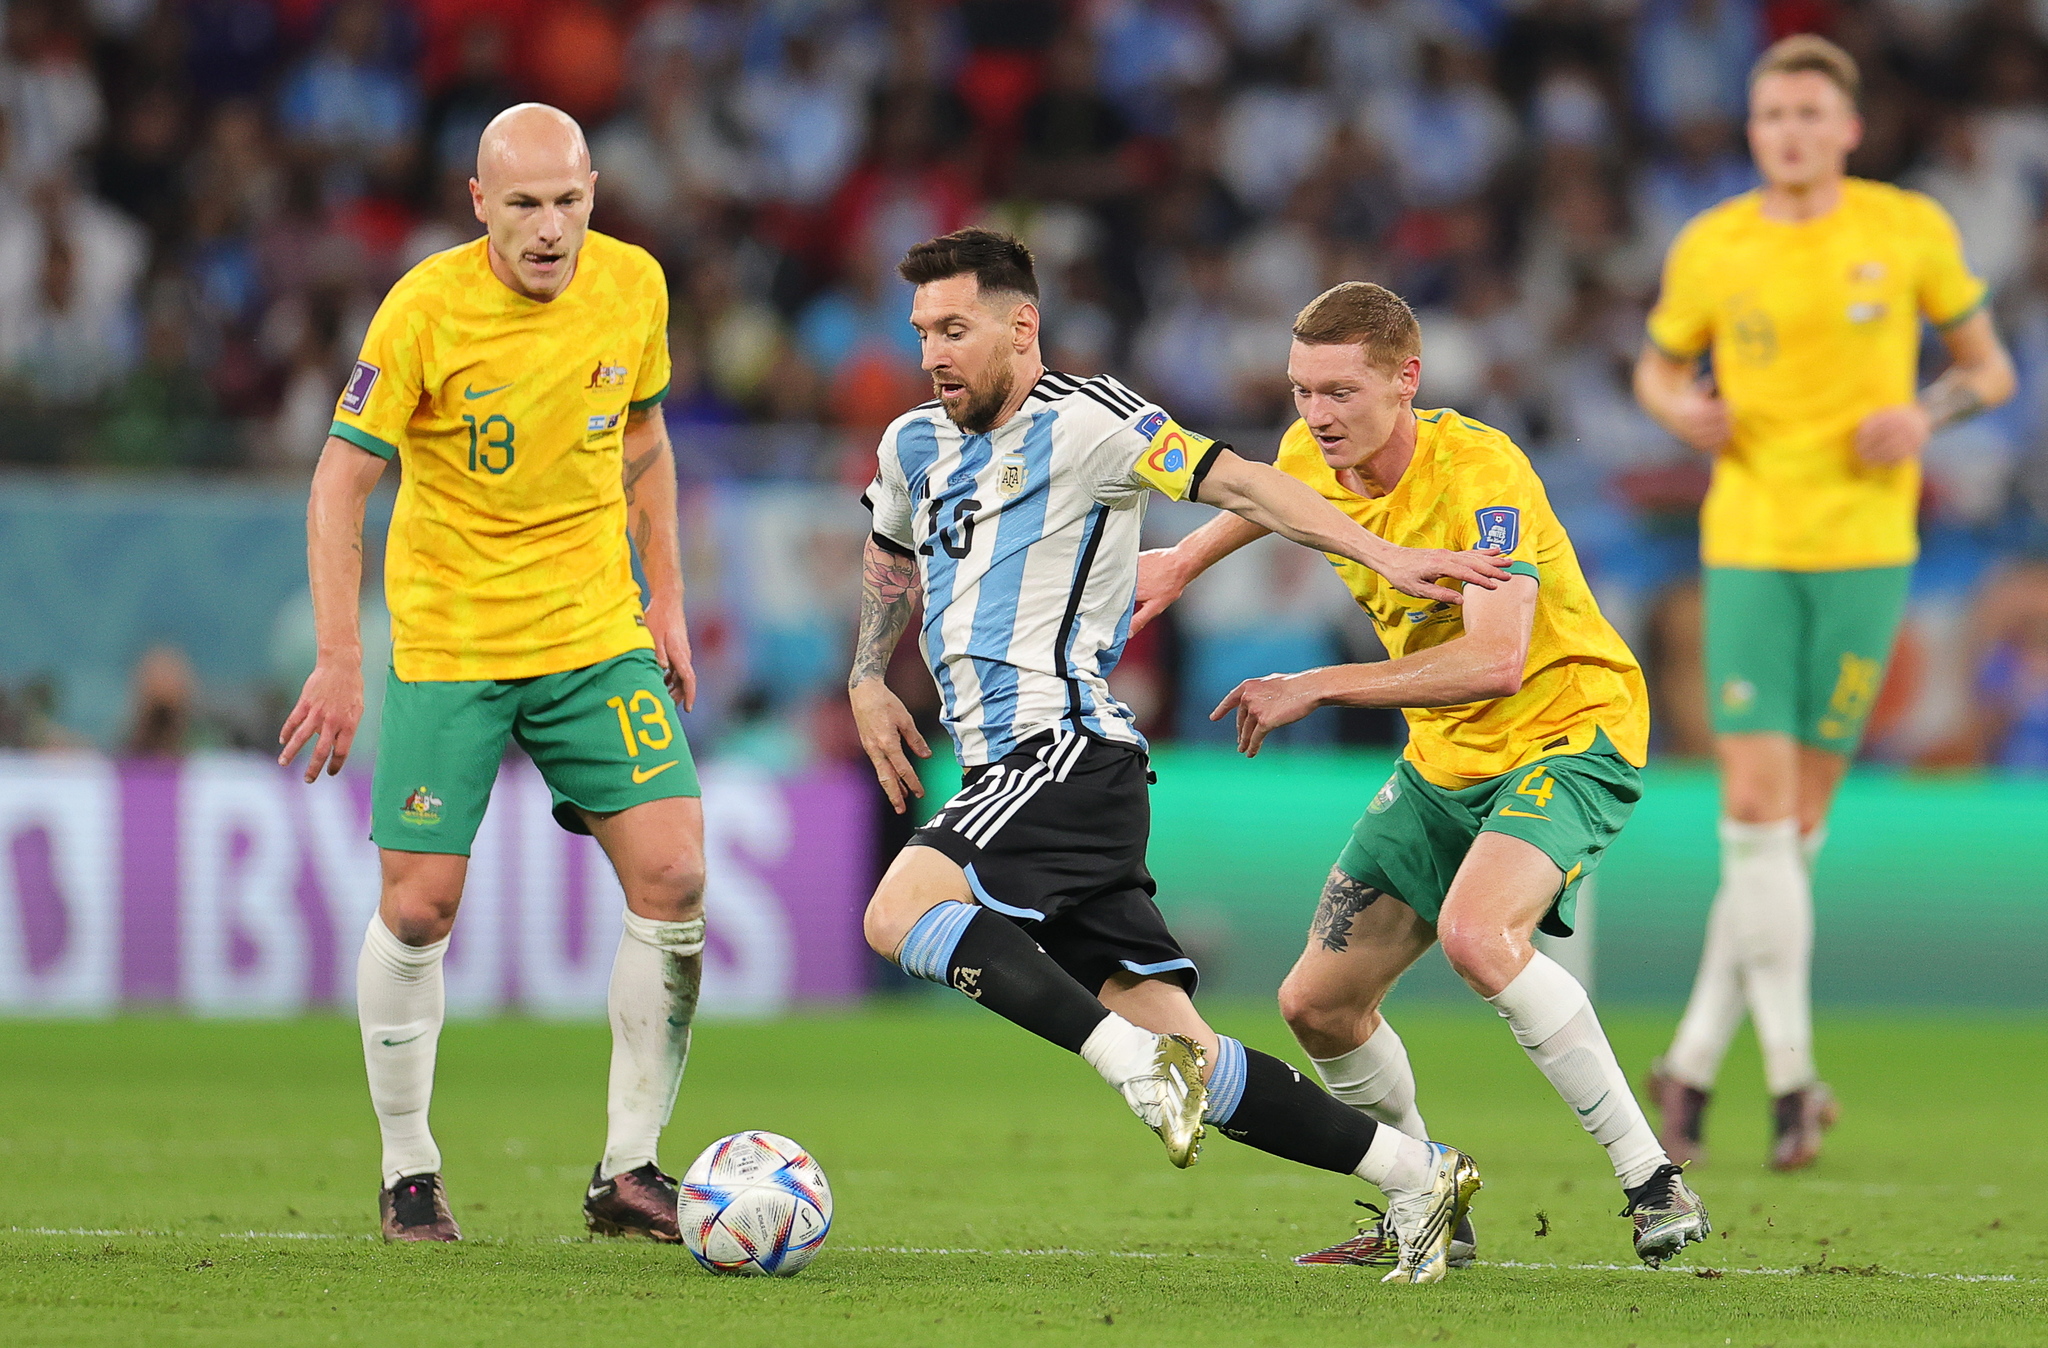 Argentina squeezed past a spirited Australia side, pulling off a 2-1 win at the Ahmad bin Ali Stadium to reach the 2022 World Cup quarter-finals